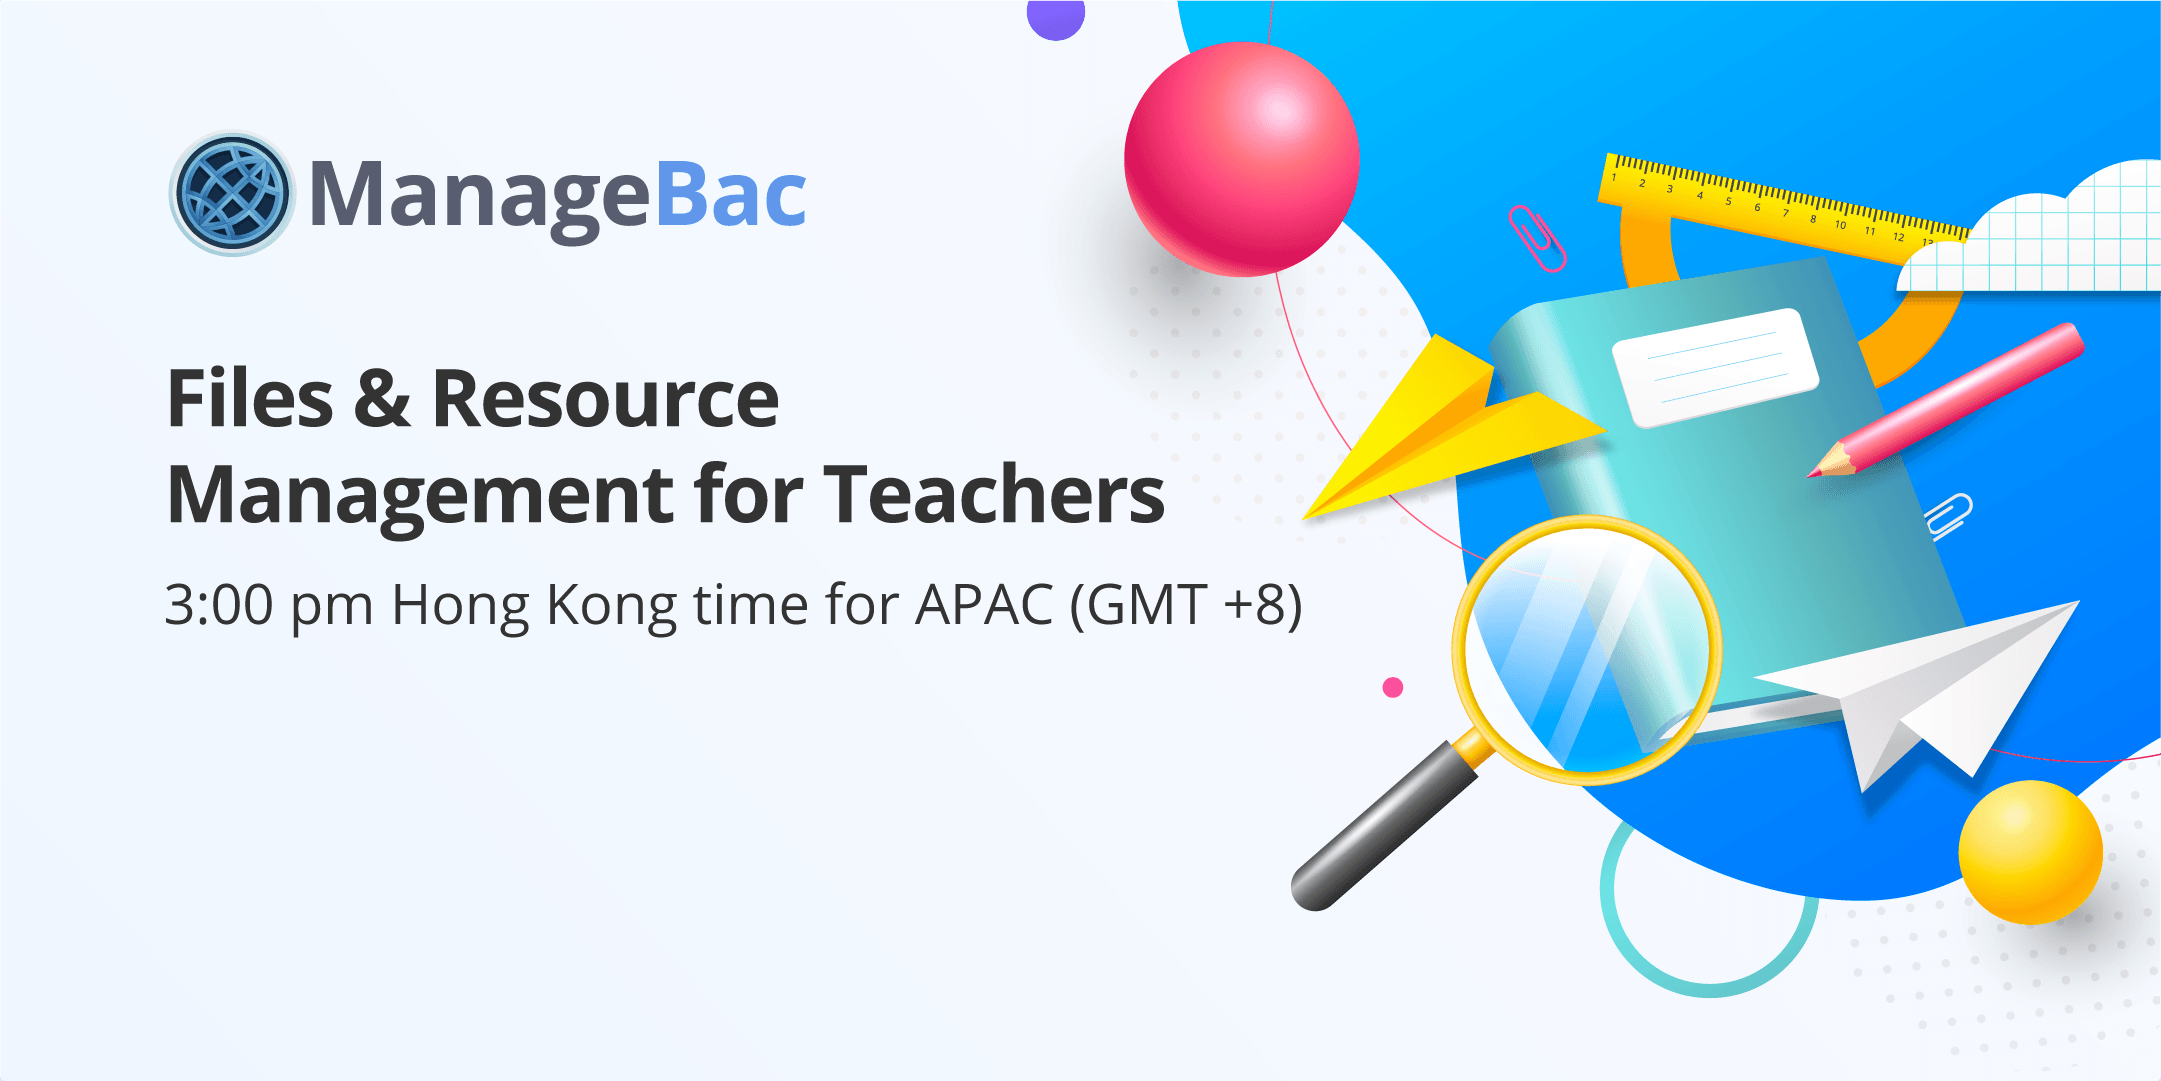 Files & Resource Management for Teachers